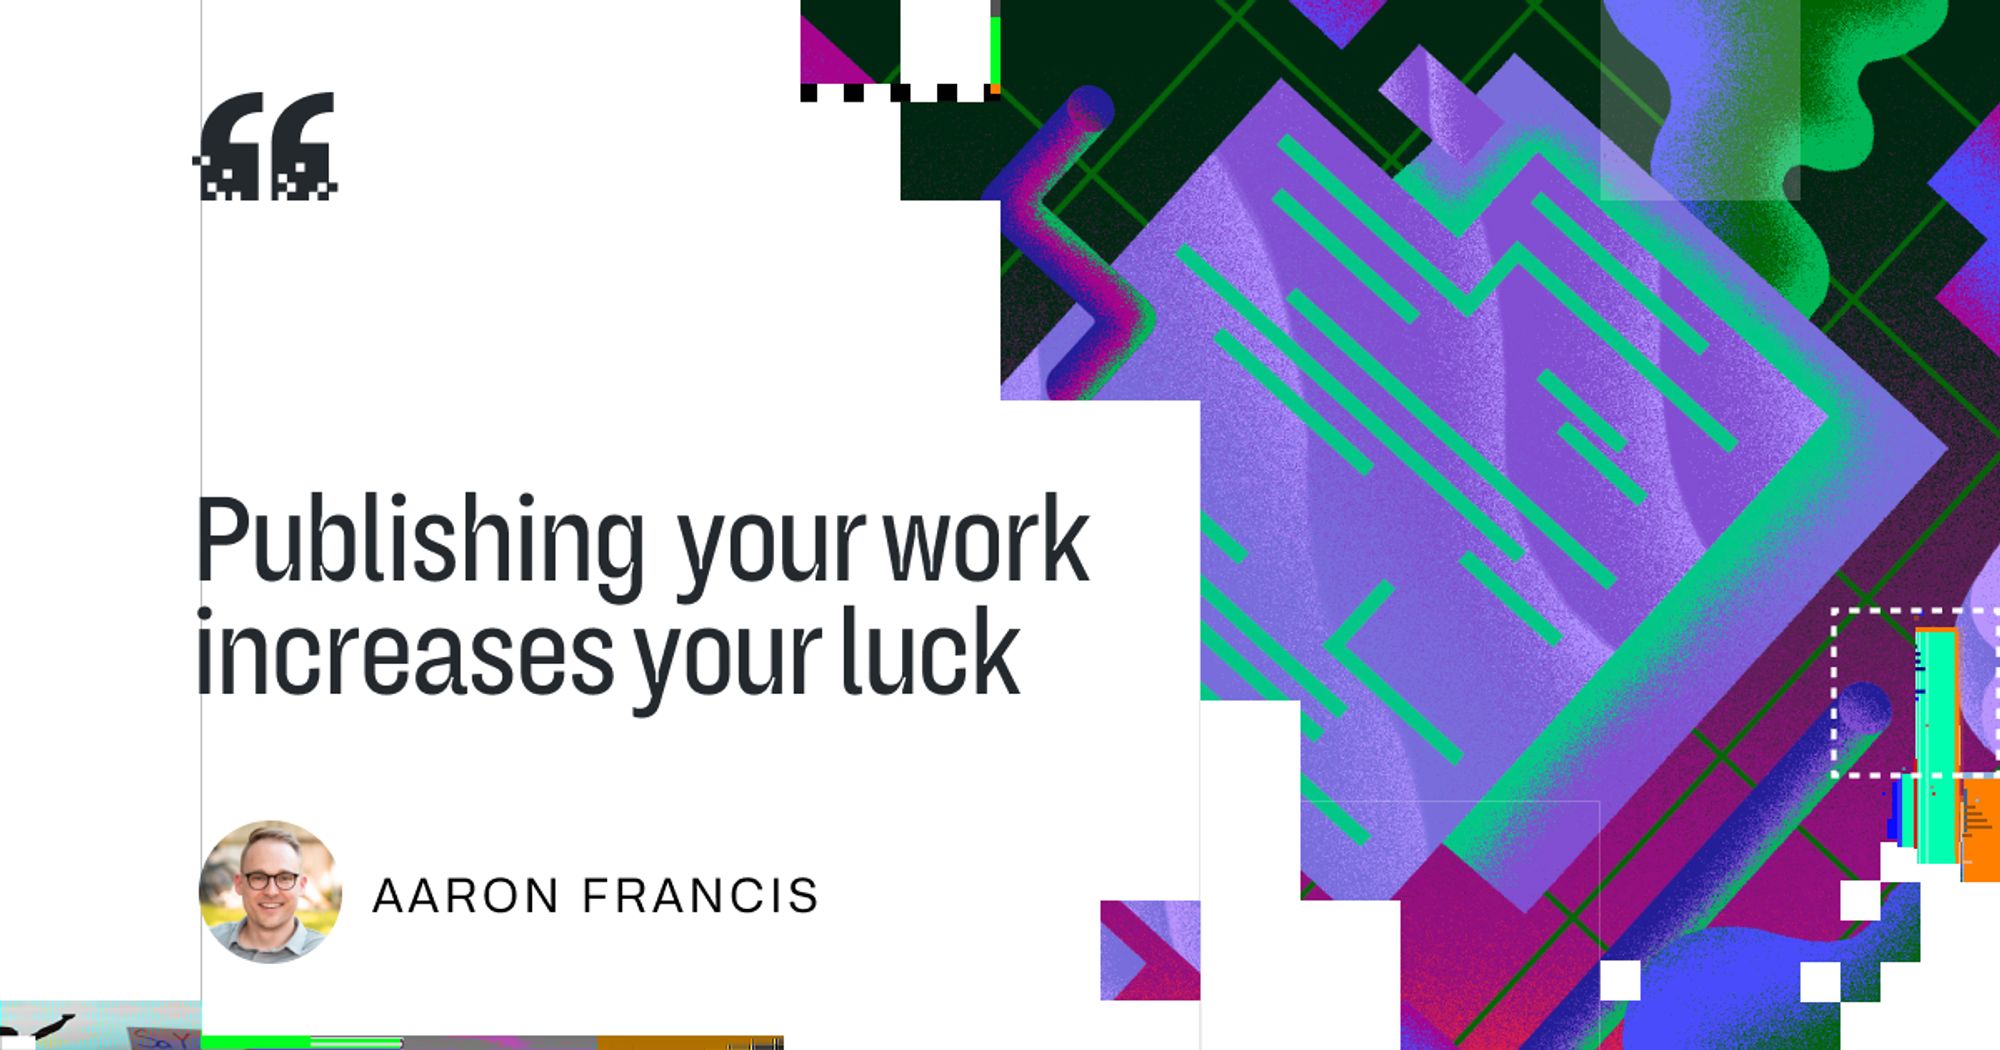 Publishing your work increases your luck